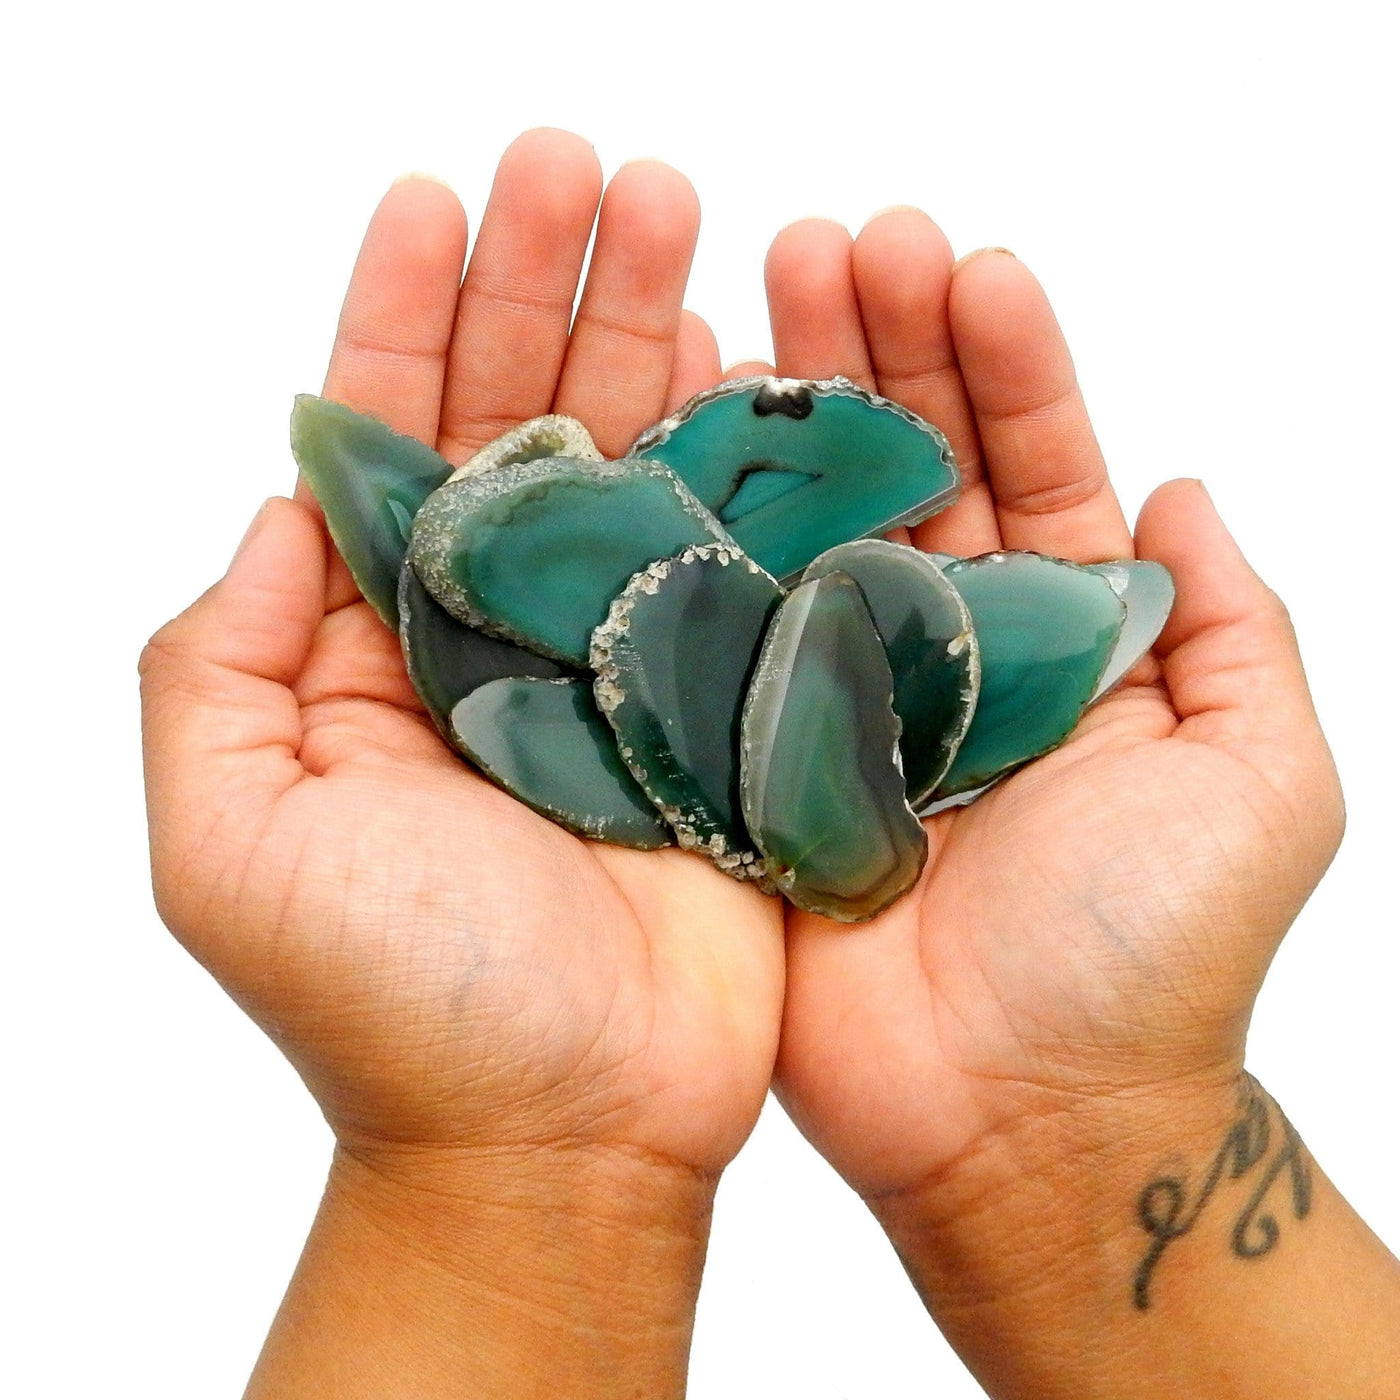 Picture of multiple green agate slices in hand for size reference.